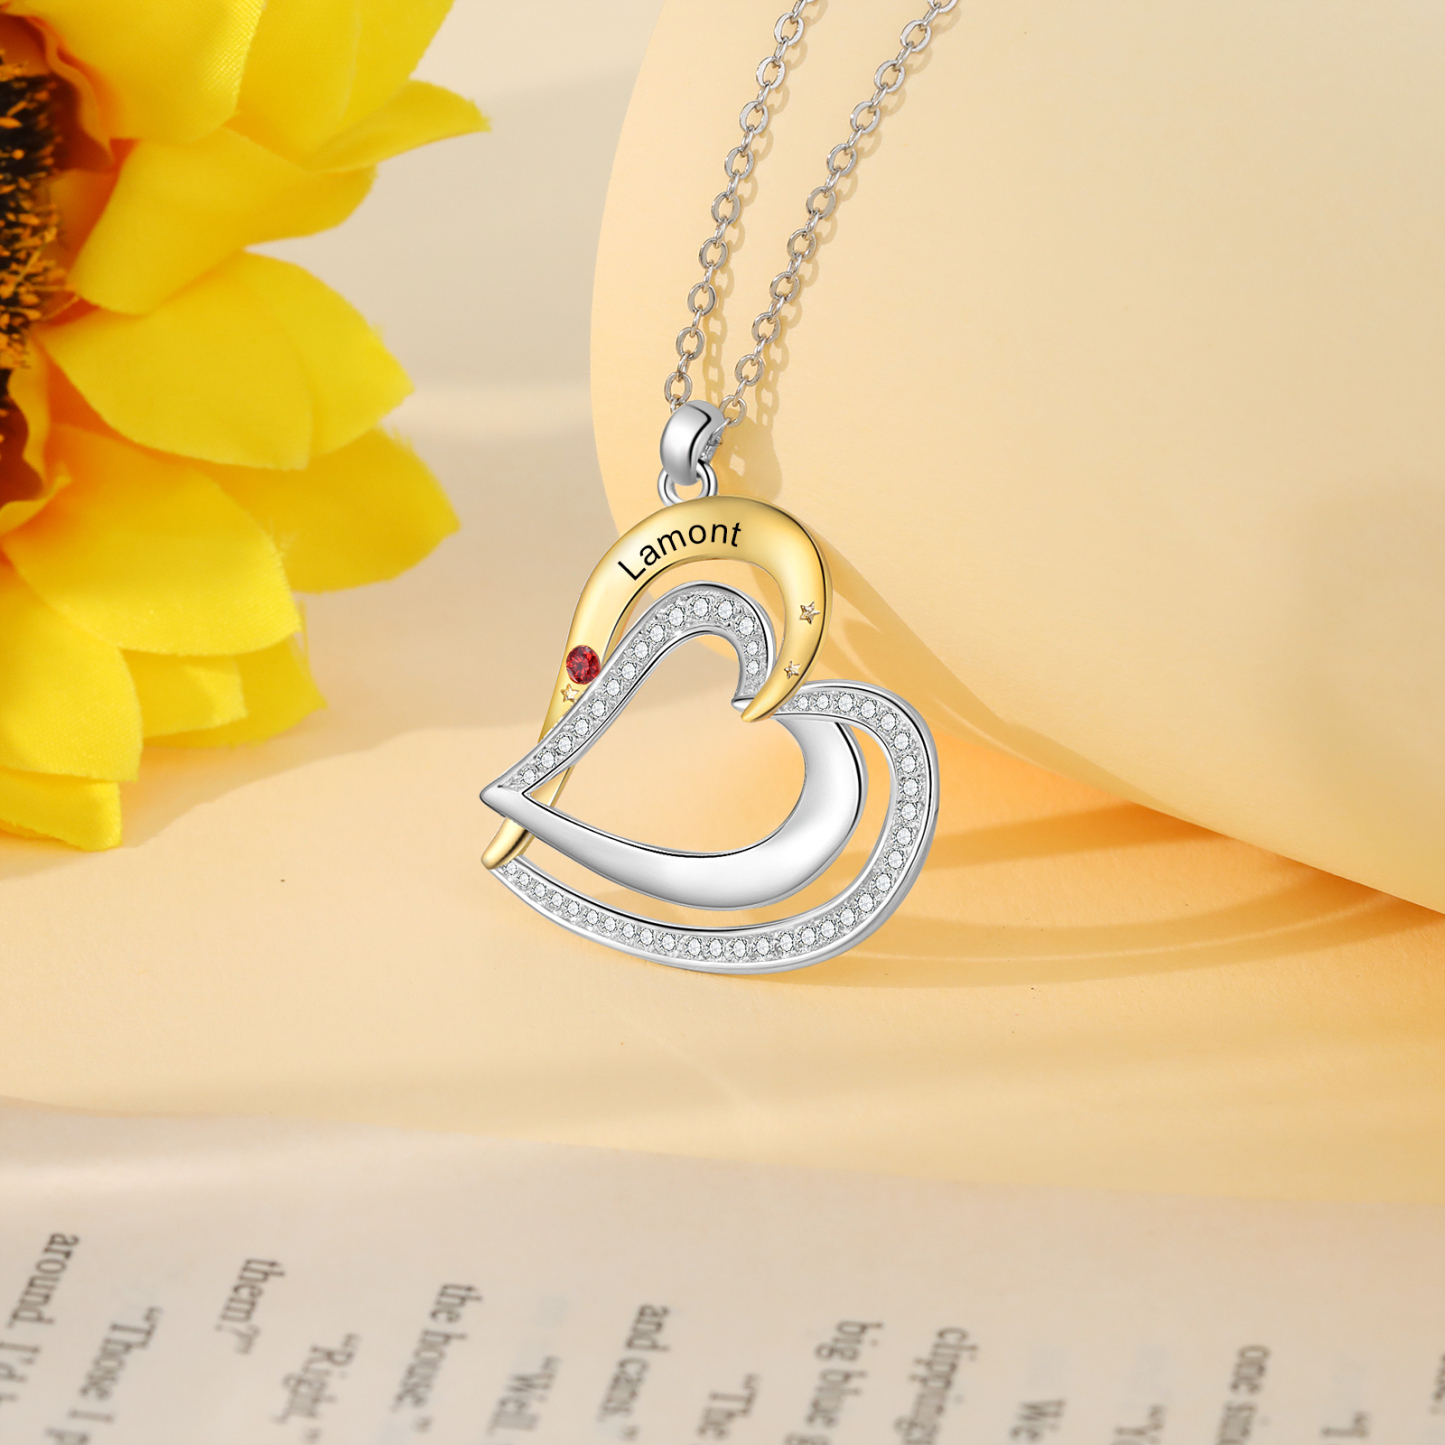 1 Name - Personalized Love Necklace with Customized Name and Birthstone, A Special Gift for Her